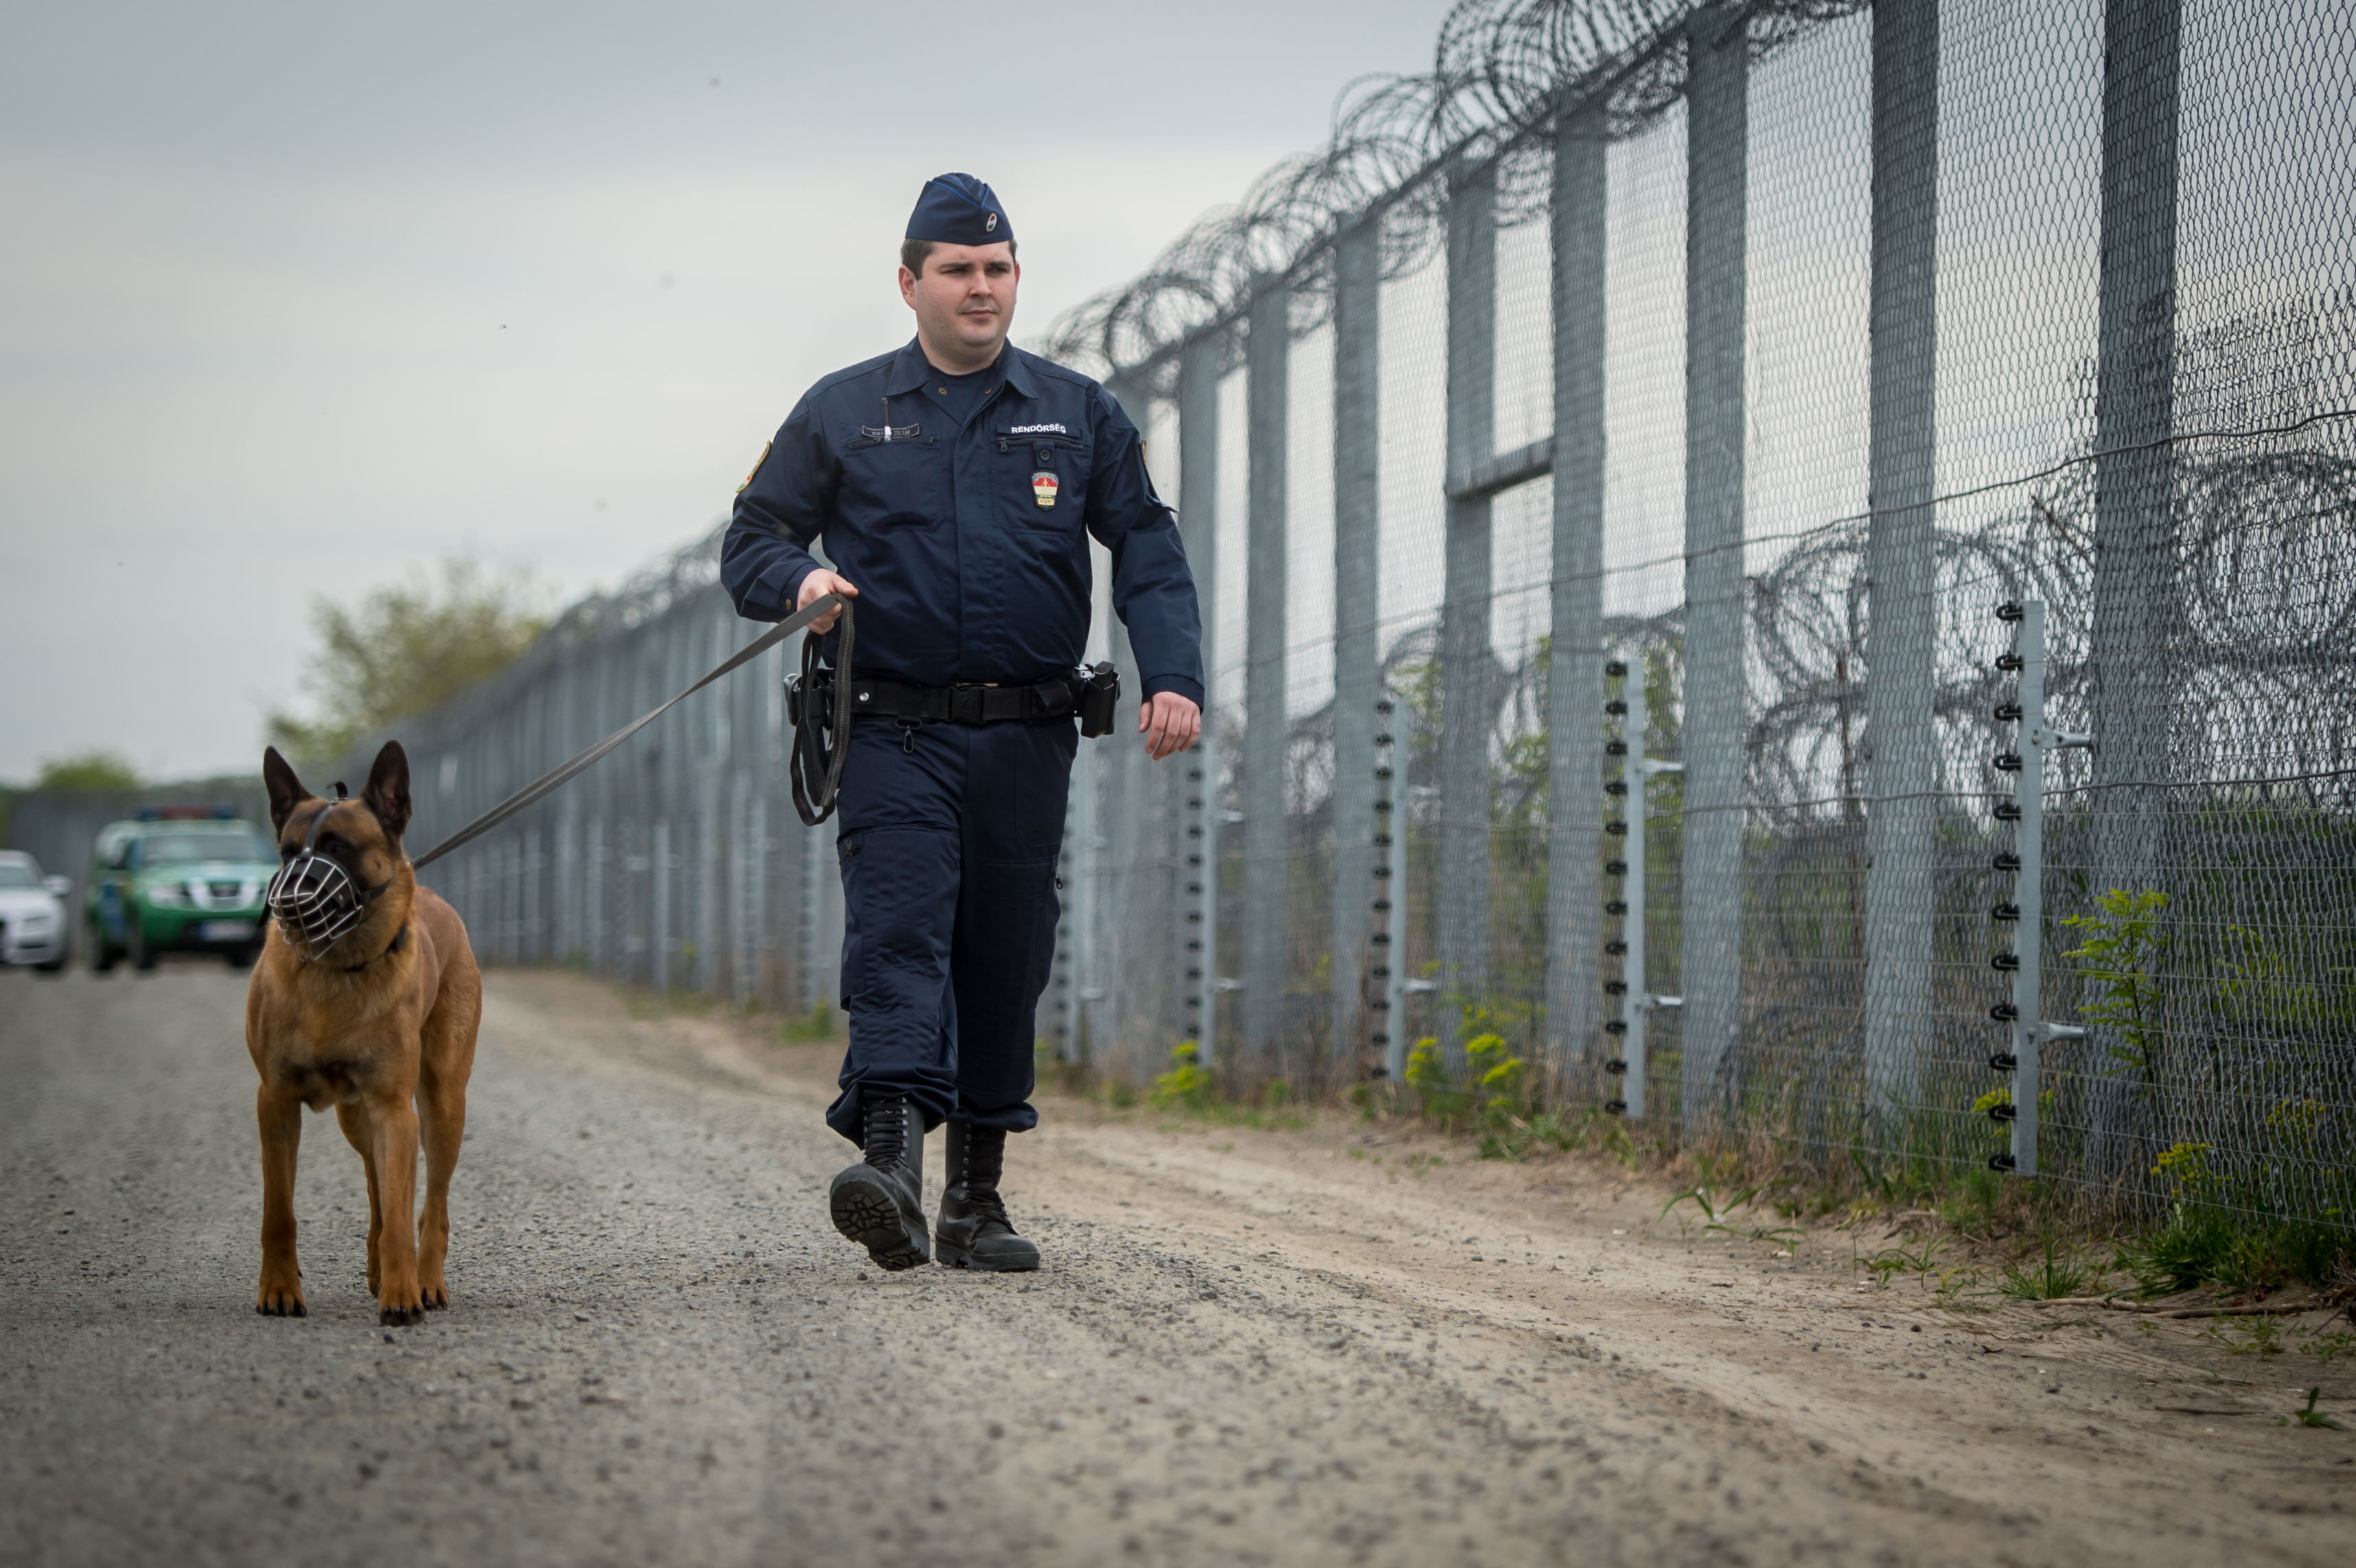 Completed a second fence at the border with Serbia in April 2017. 